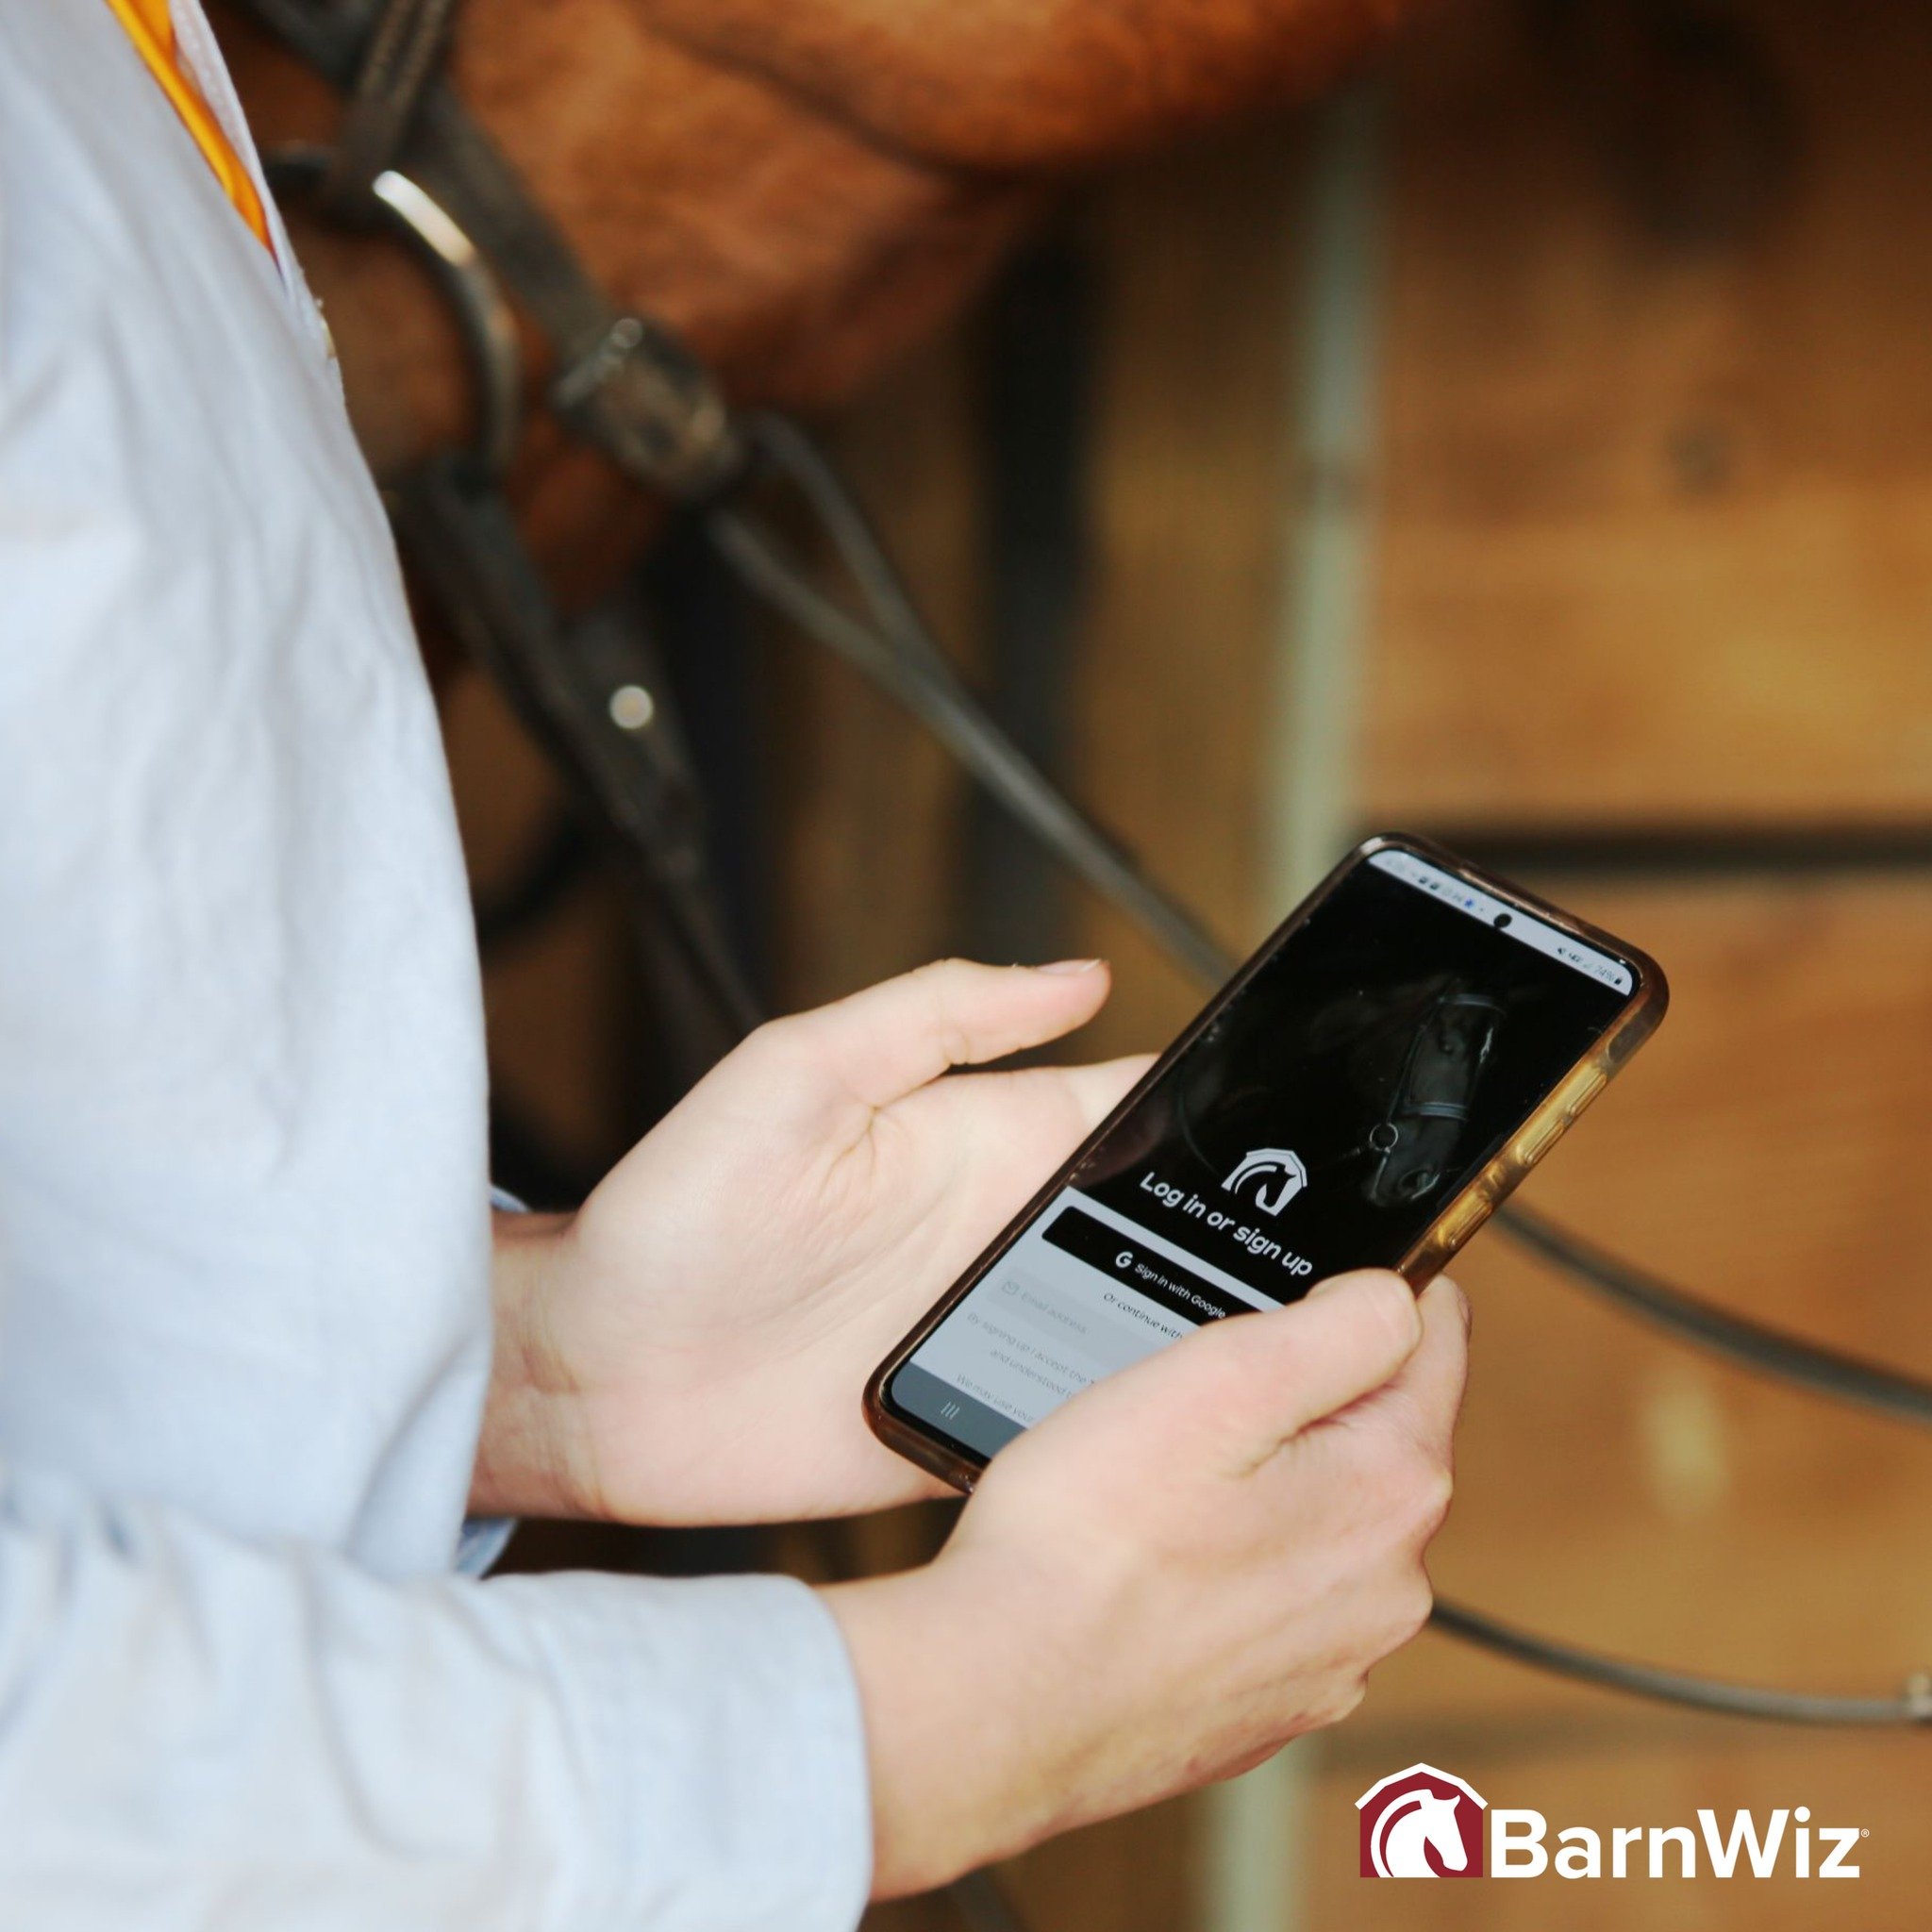 Have you downloaded the BarnWiz App yet? It's available in the Apple Store or Google Play Store, and you can create a free Rider Profile and/or Horse Profile and browse our Listings - new barns are being added as we go. Kids can also create a Minor P